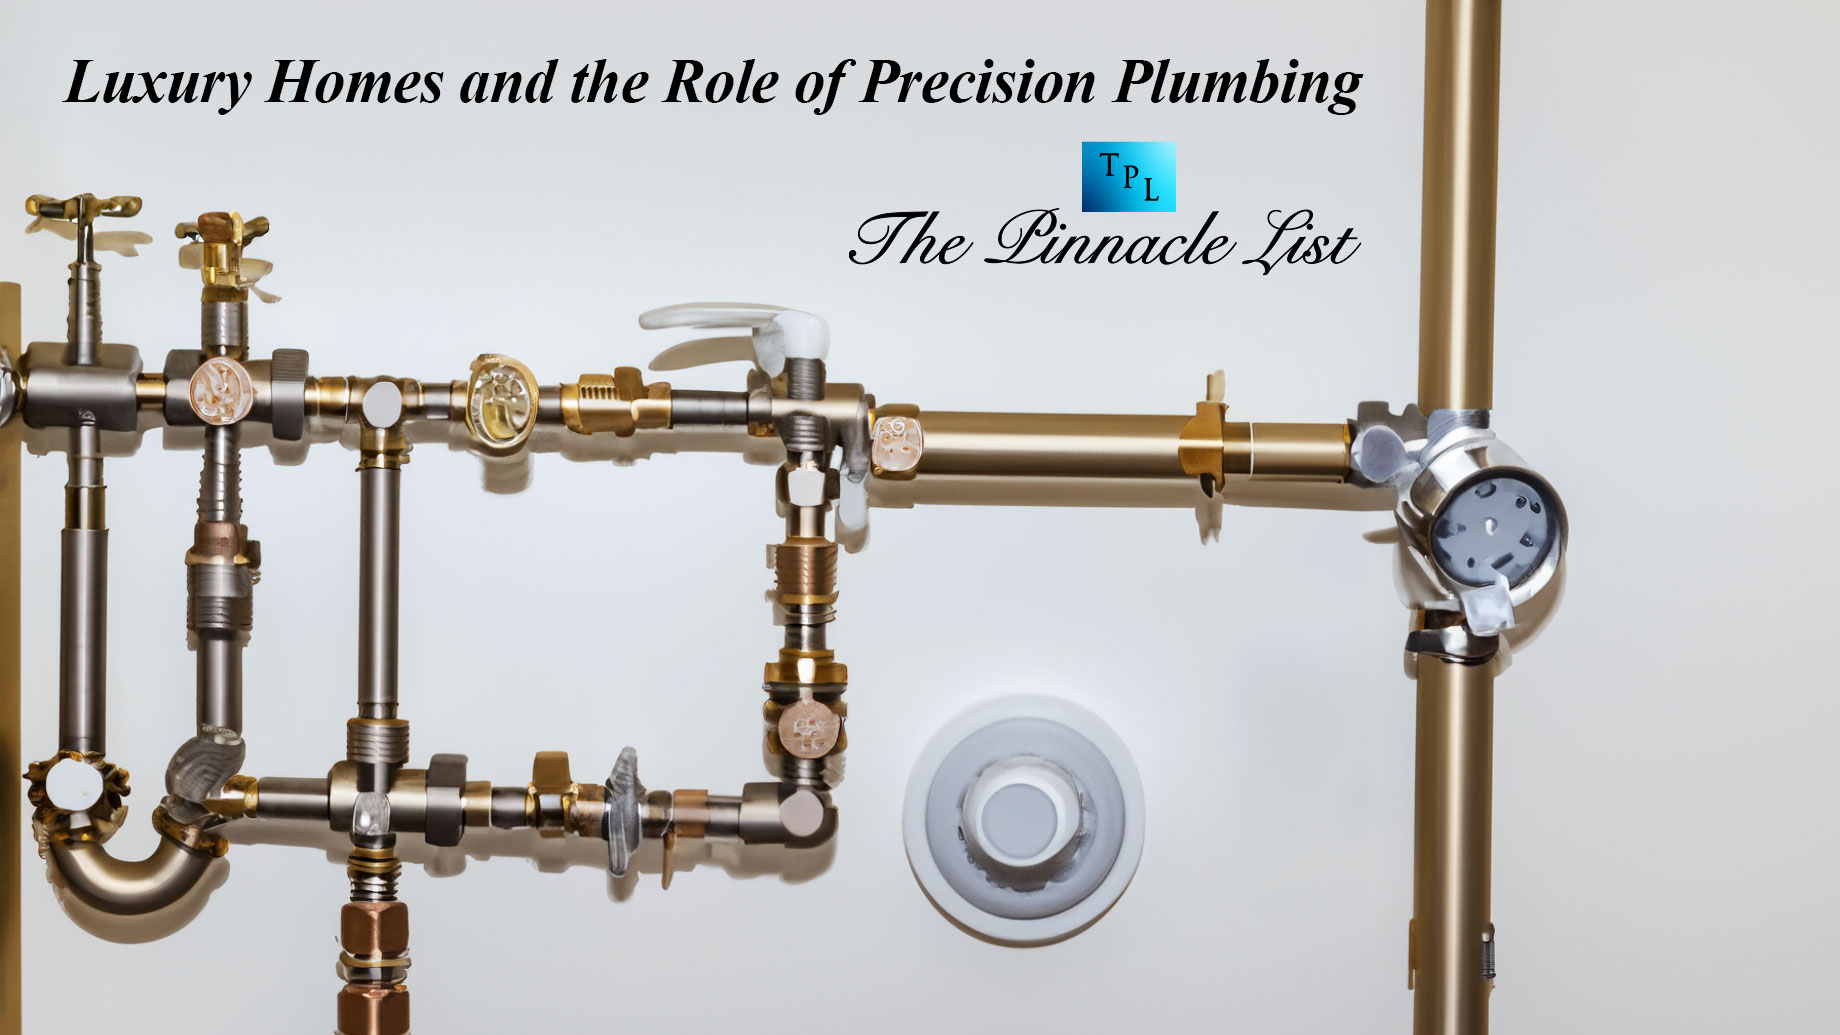 Luxury Homes and the Role of Precision Plumbing